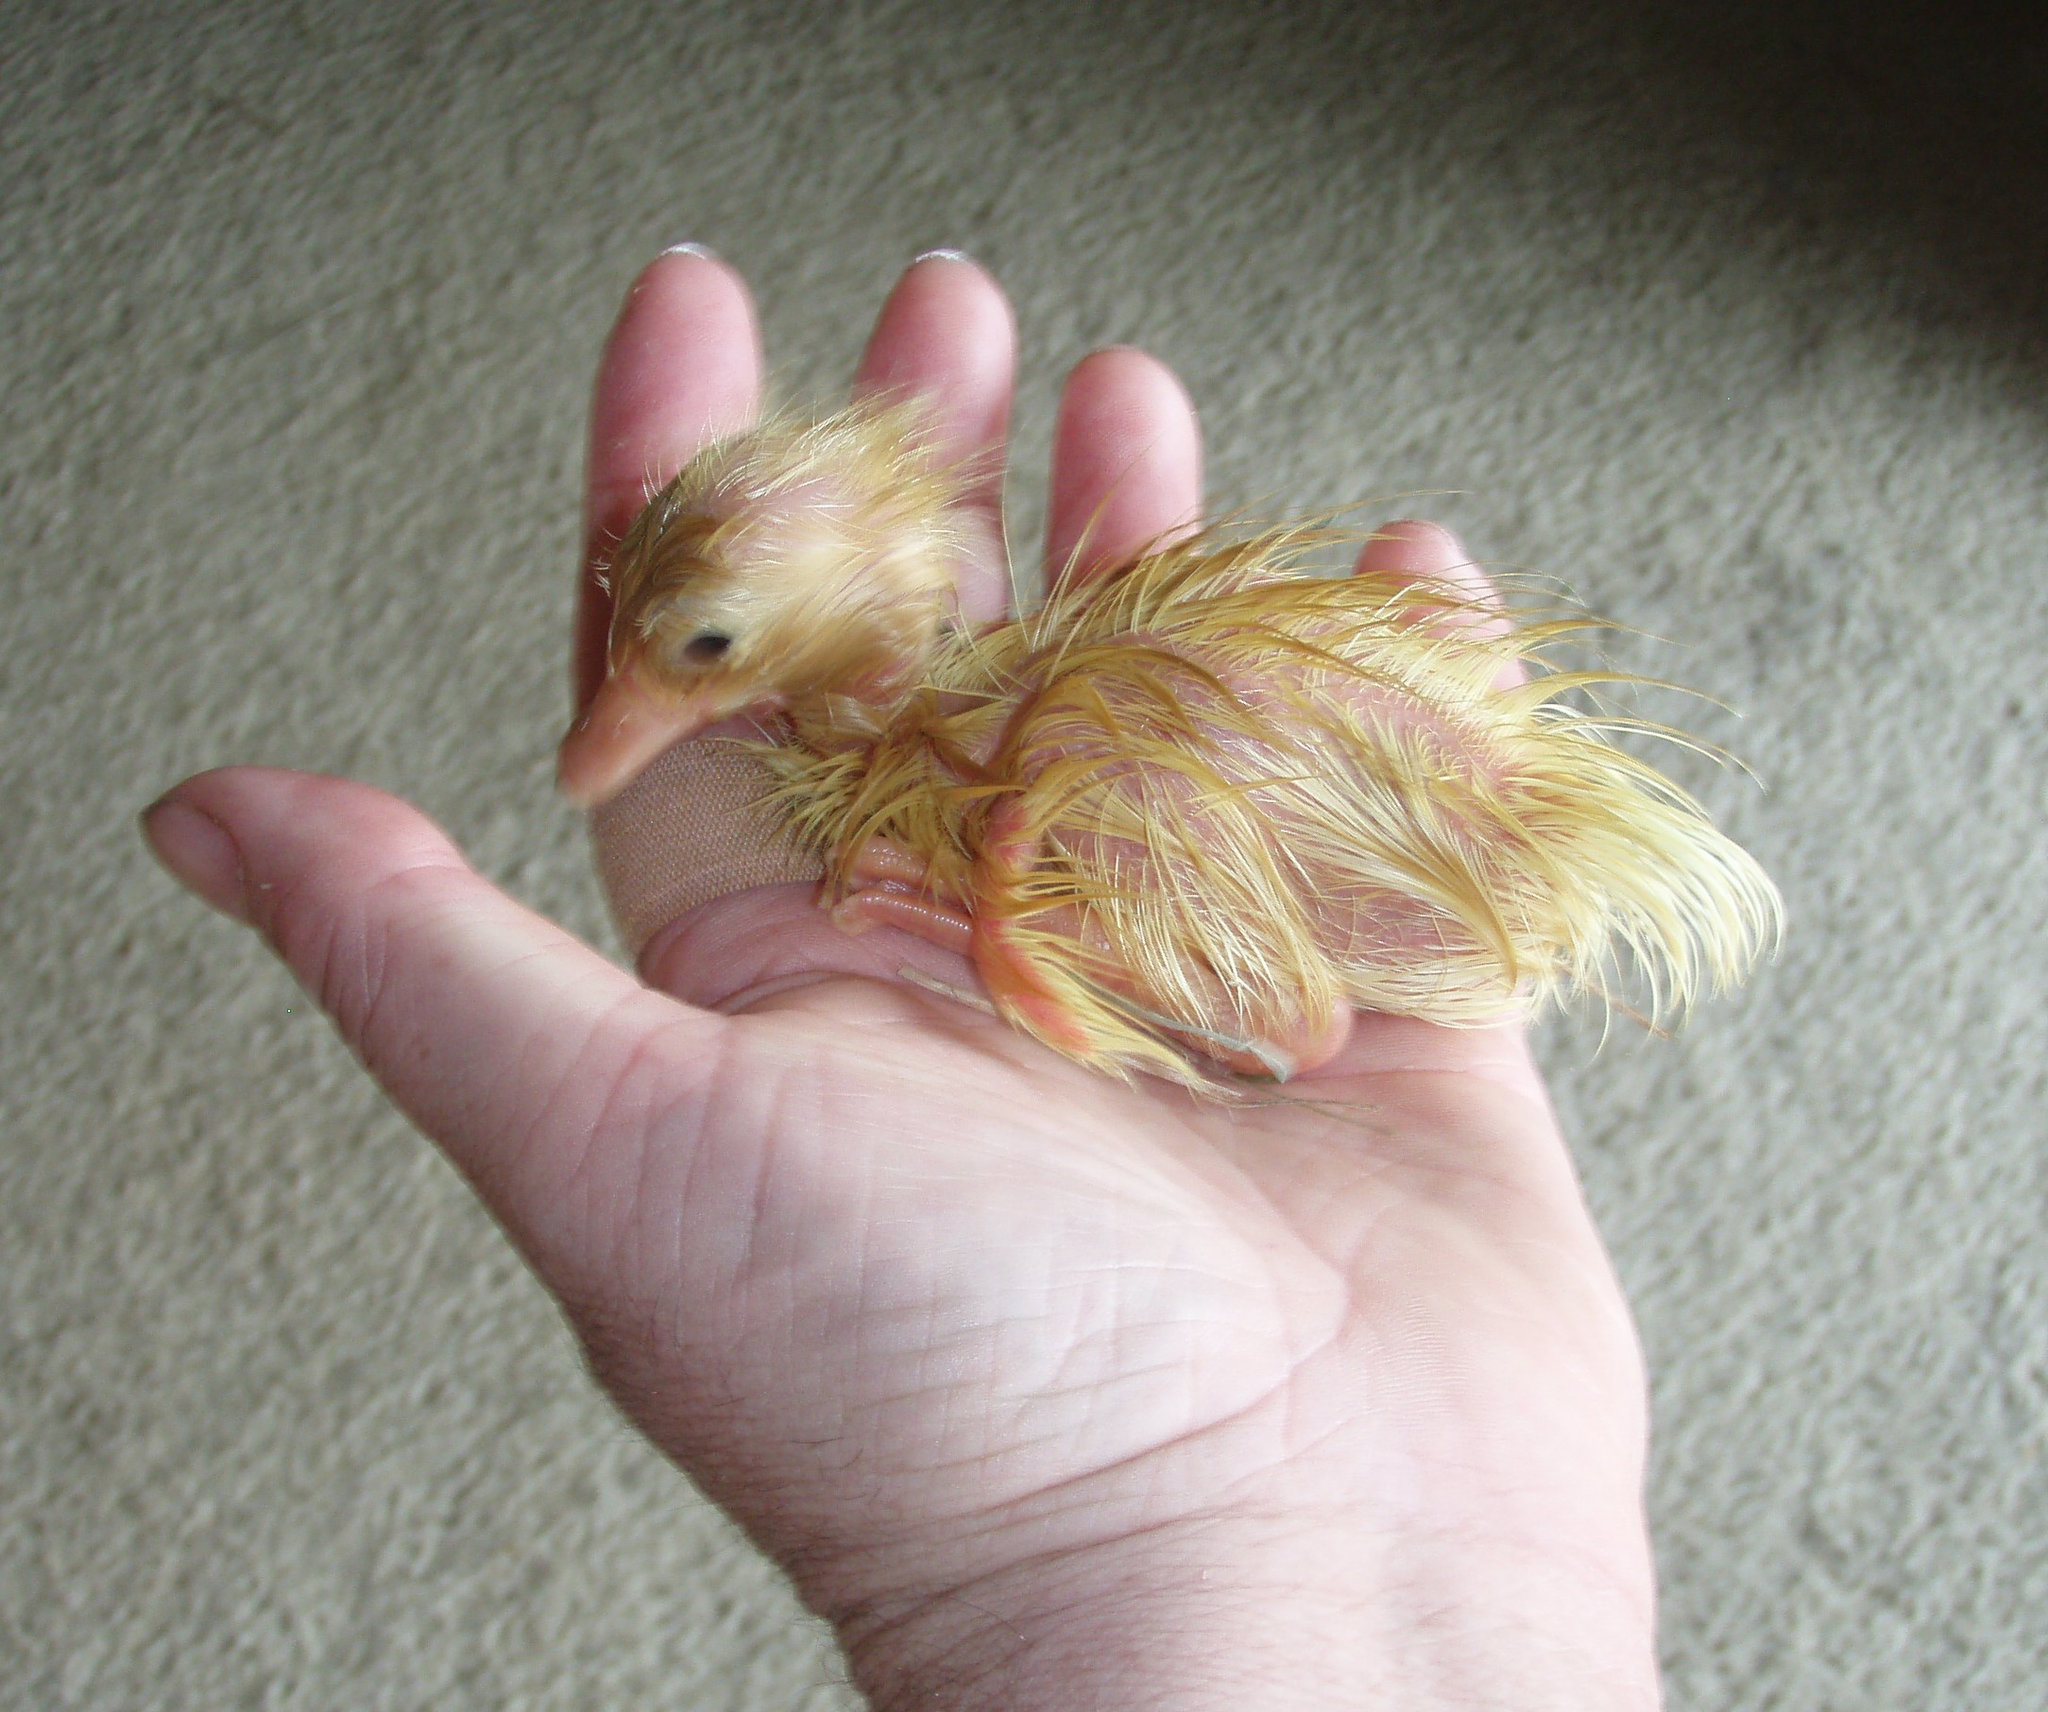 duckling #2, freshly hatched